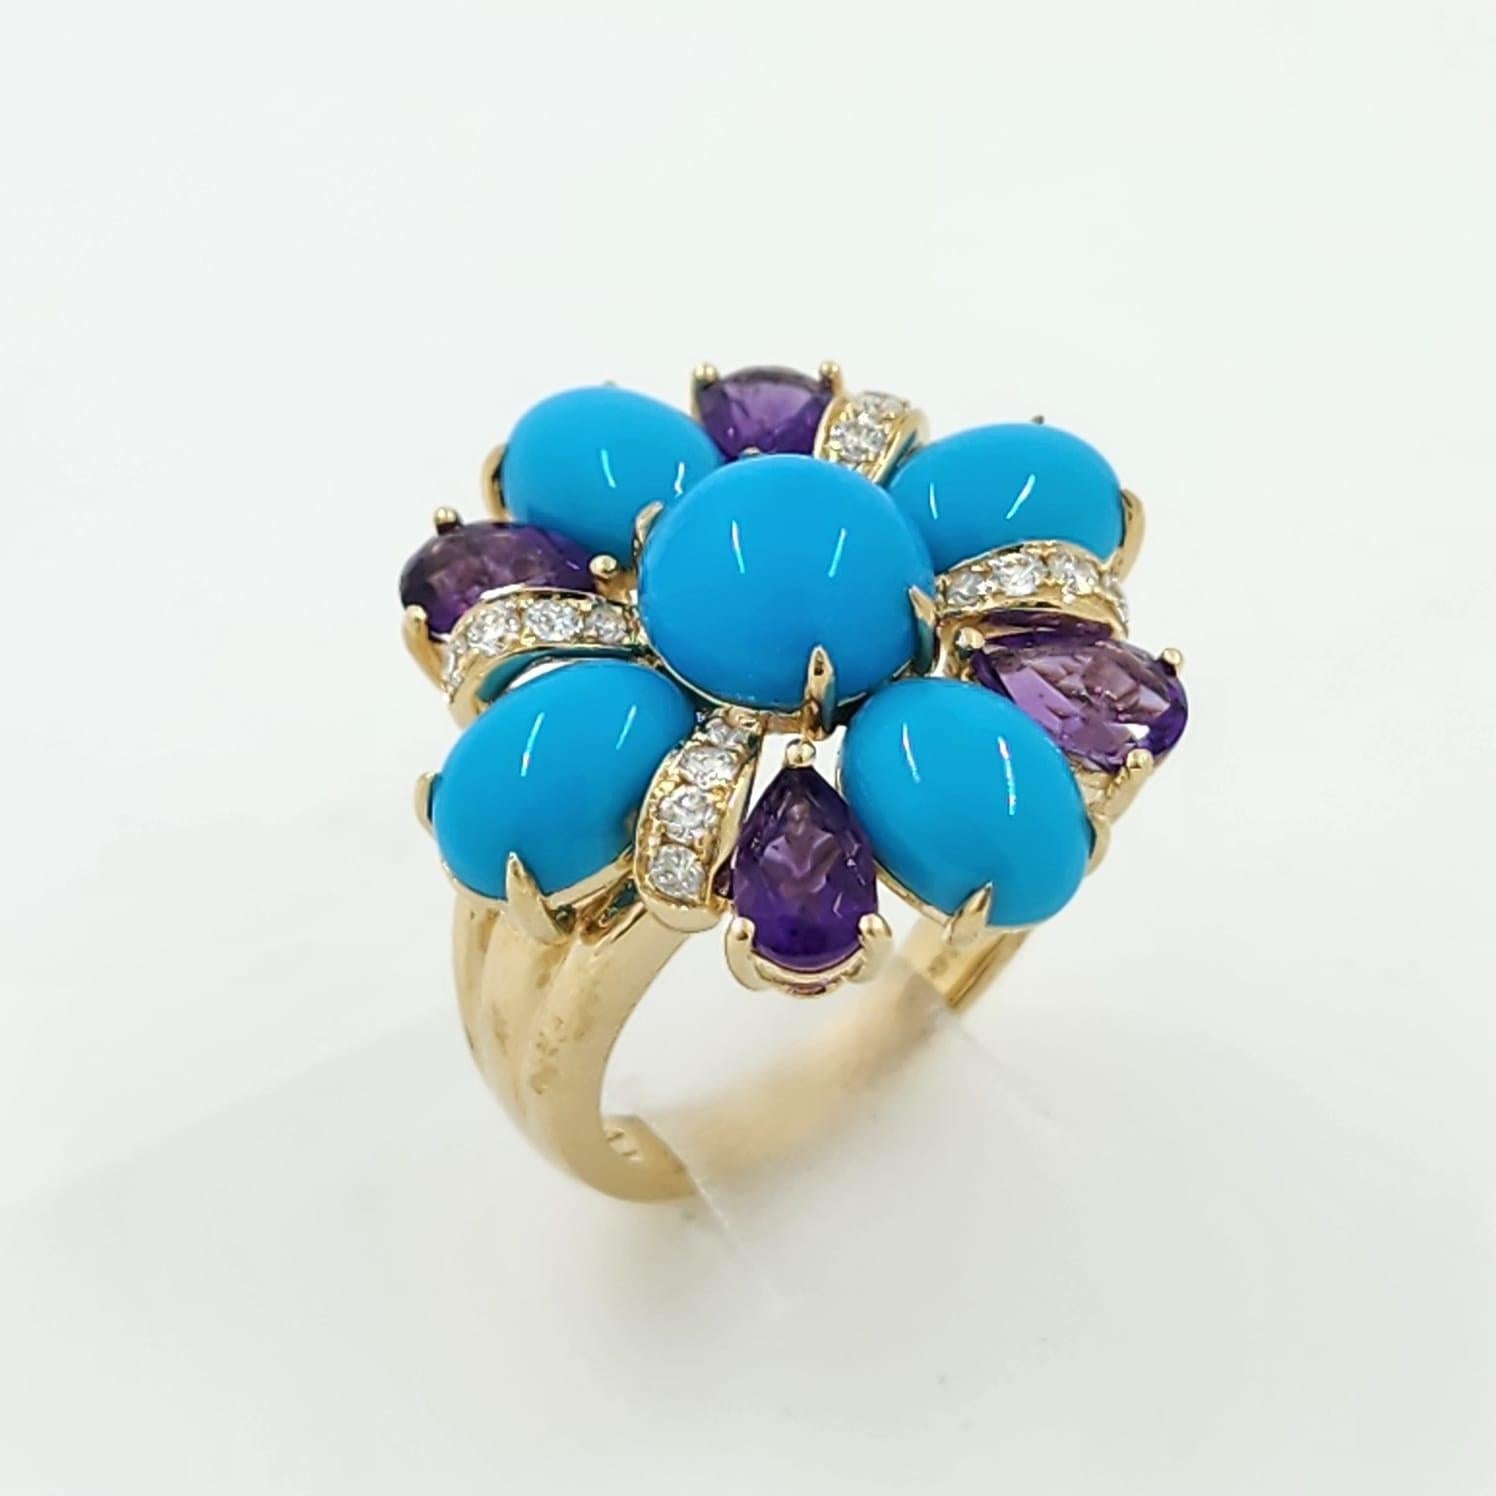 Women's Vintage Sleeping Beauty Turquoise Amethyst and Diamond Ring in 14 Karat Gold For Sale